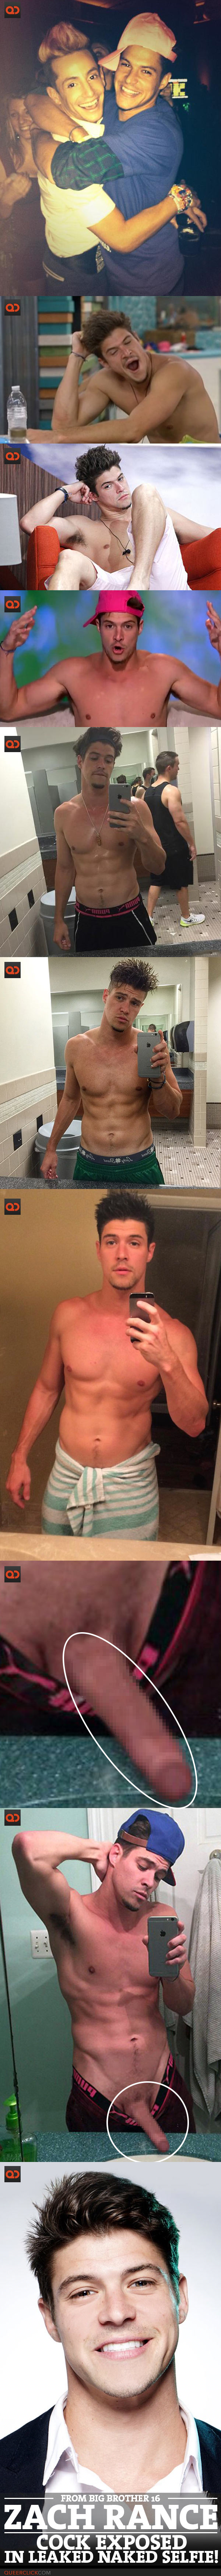 Zach Rance, From Big Brother 16, Cock Exposed In Leaked Naked Selfie!